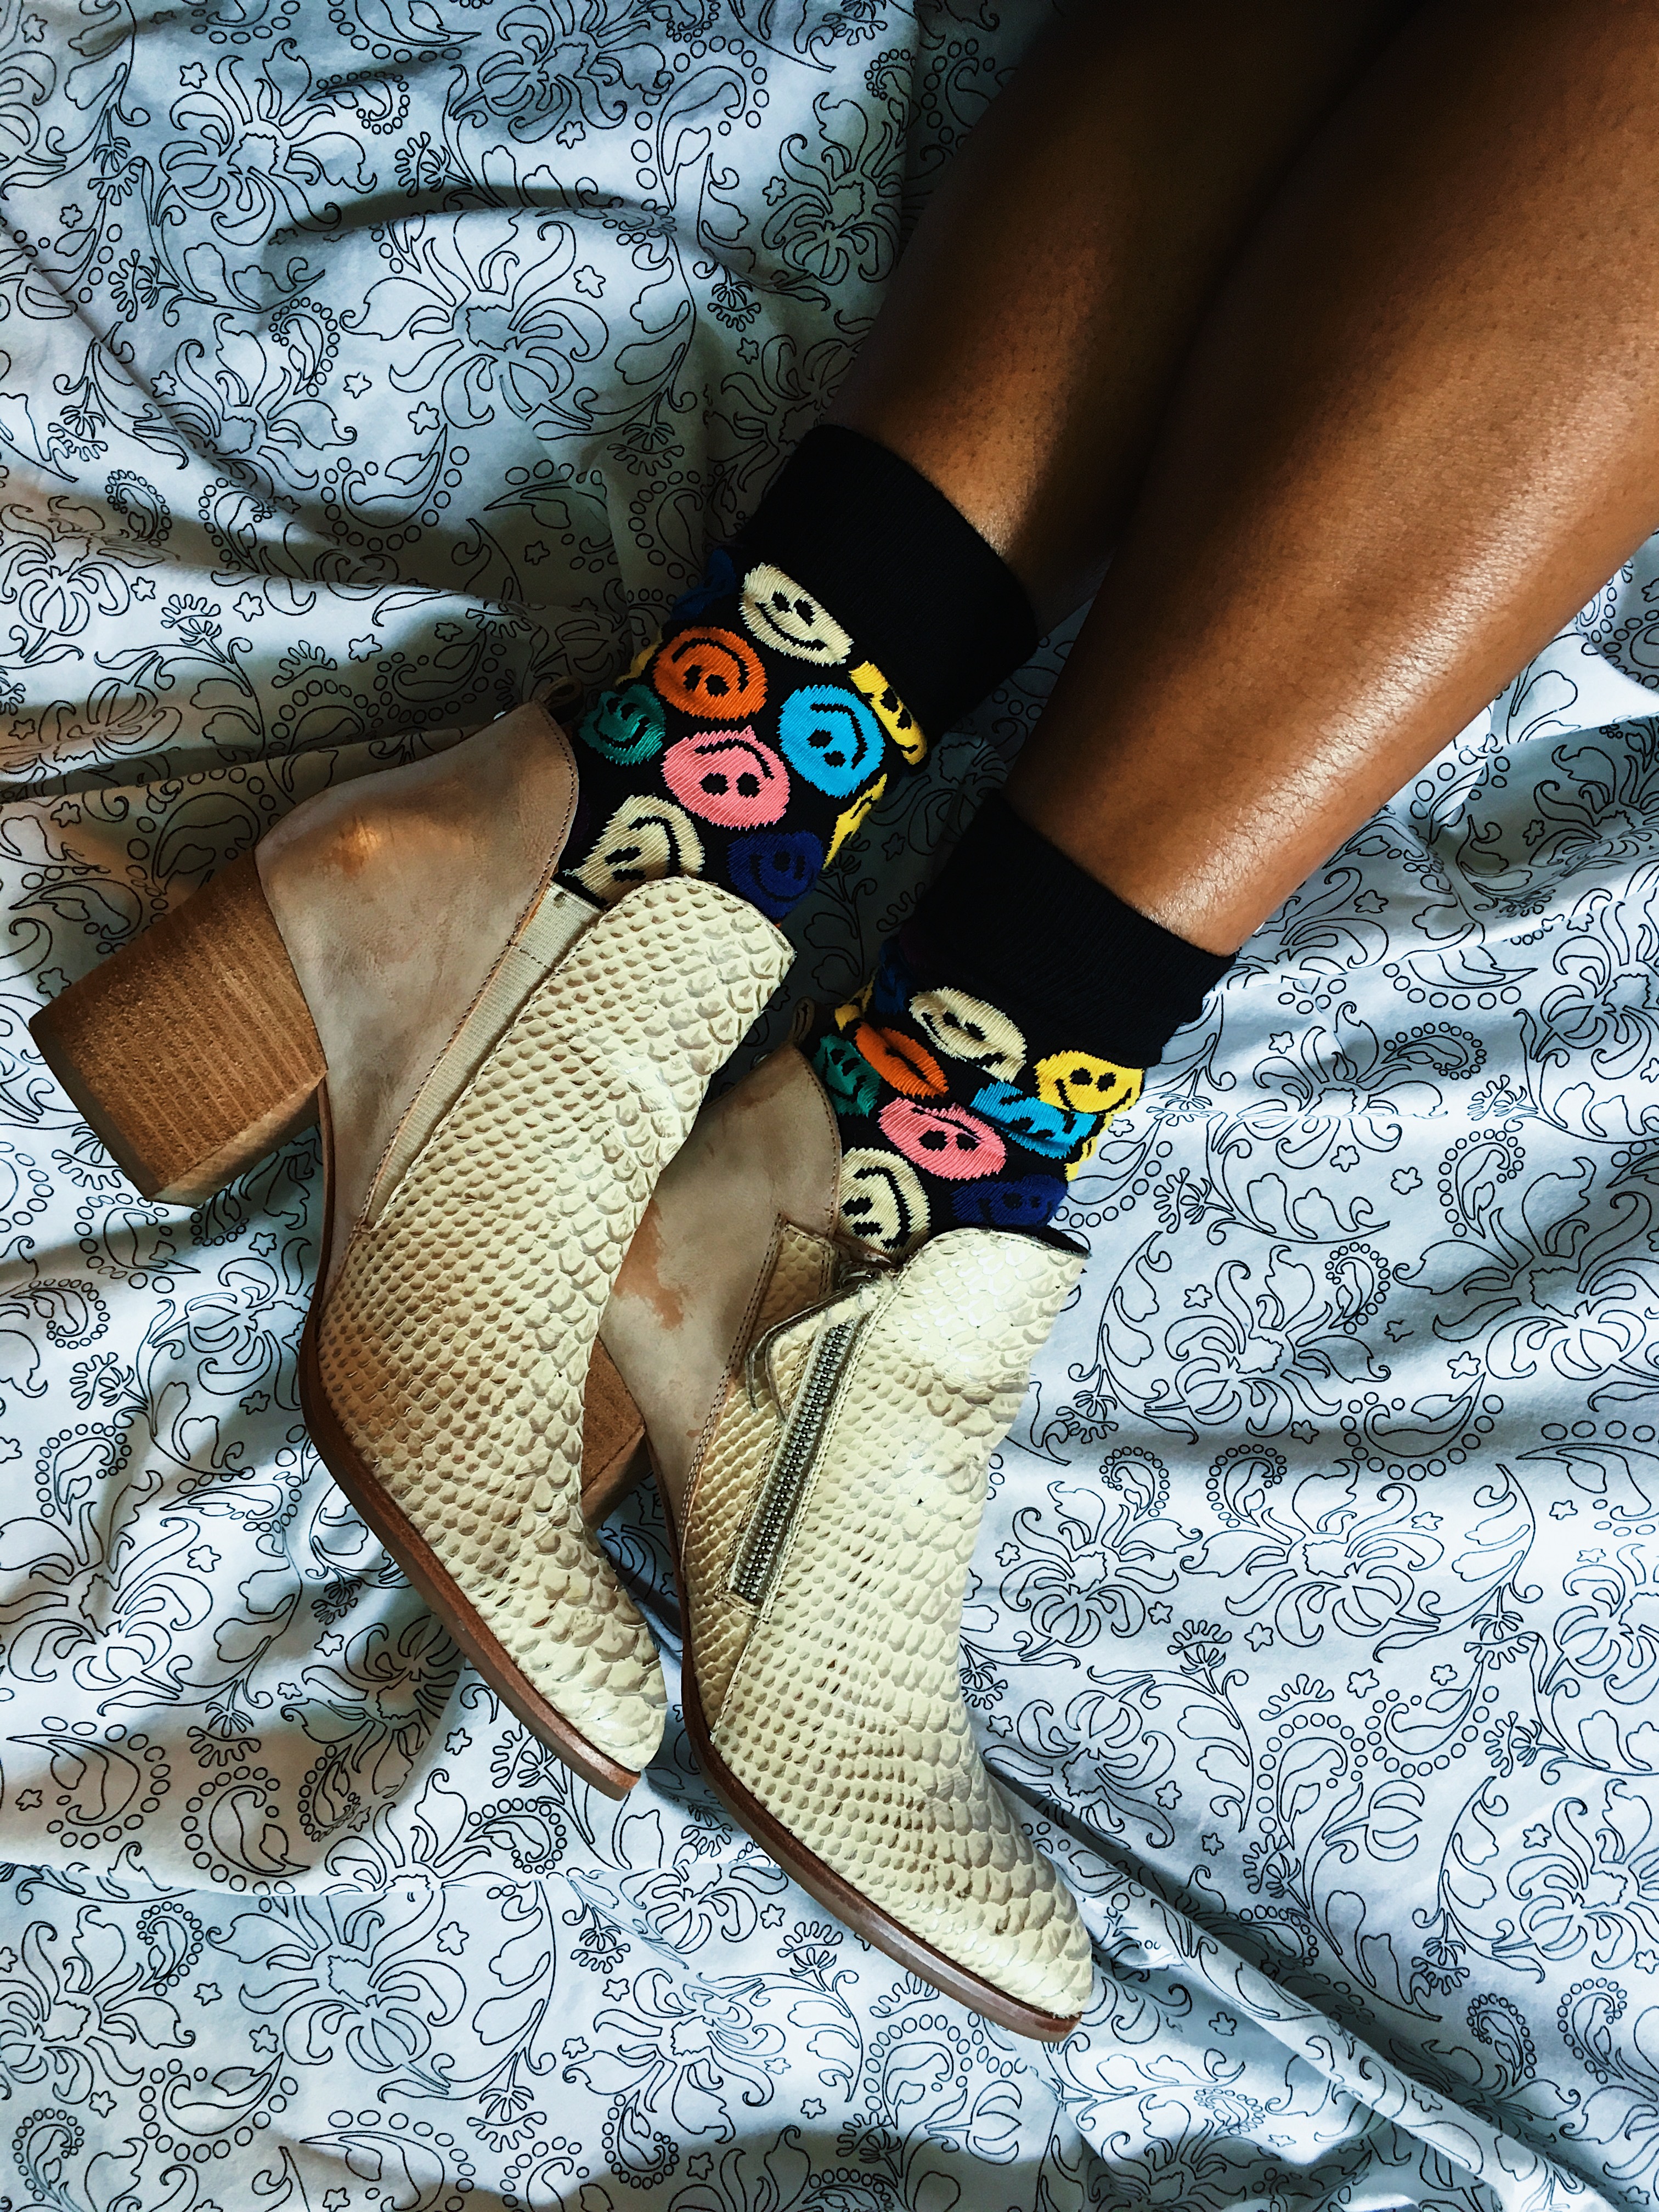 happy socks-colorful socks-snake skin booties-wear who you are-lcm